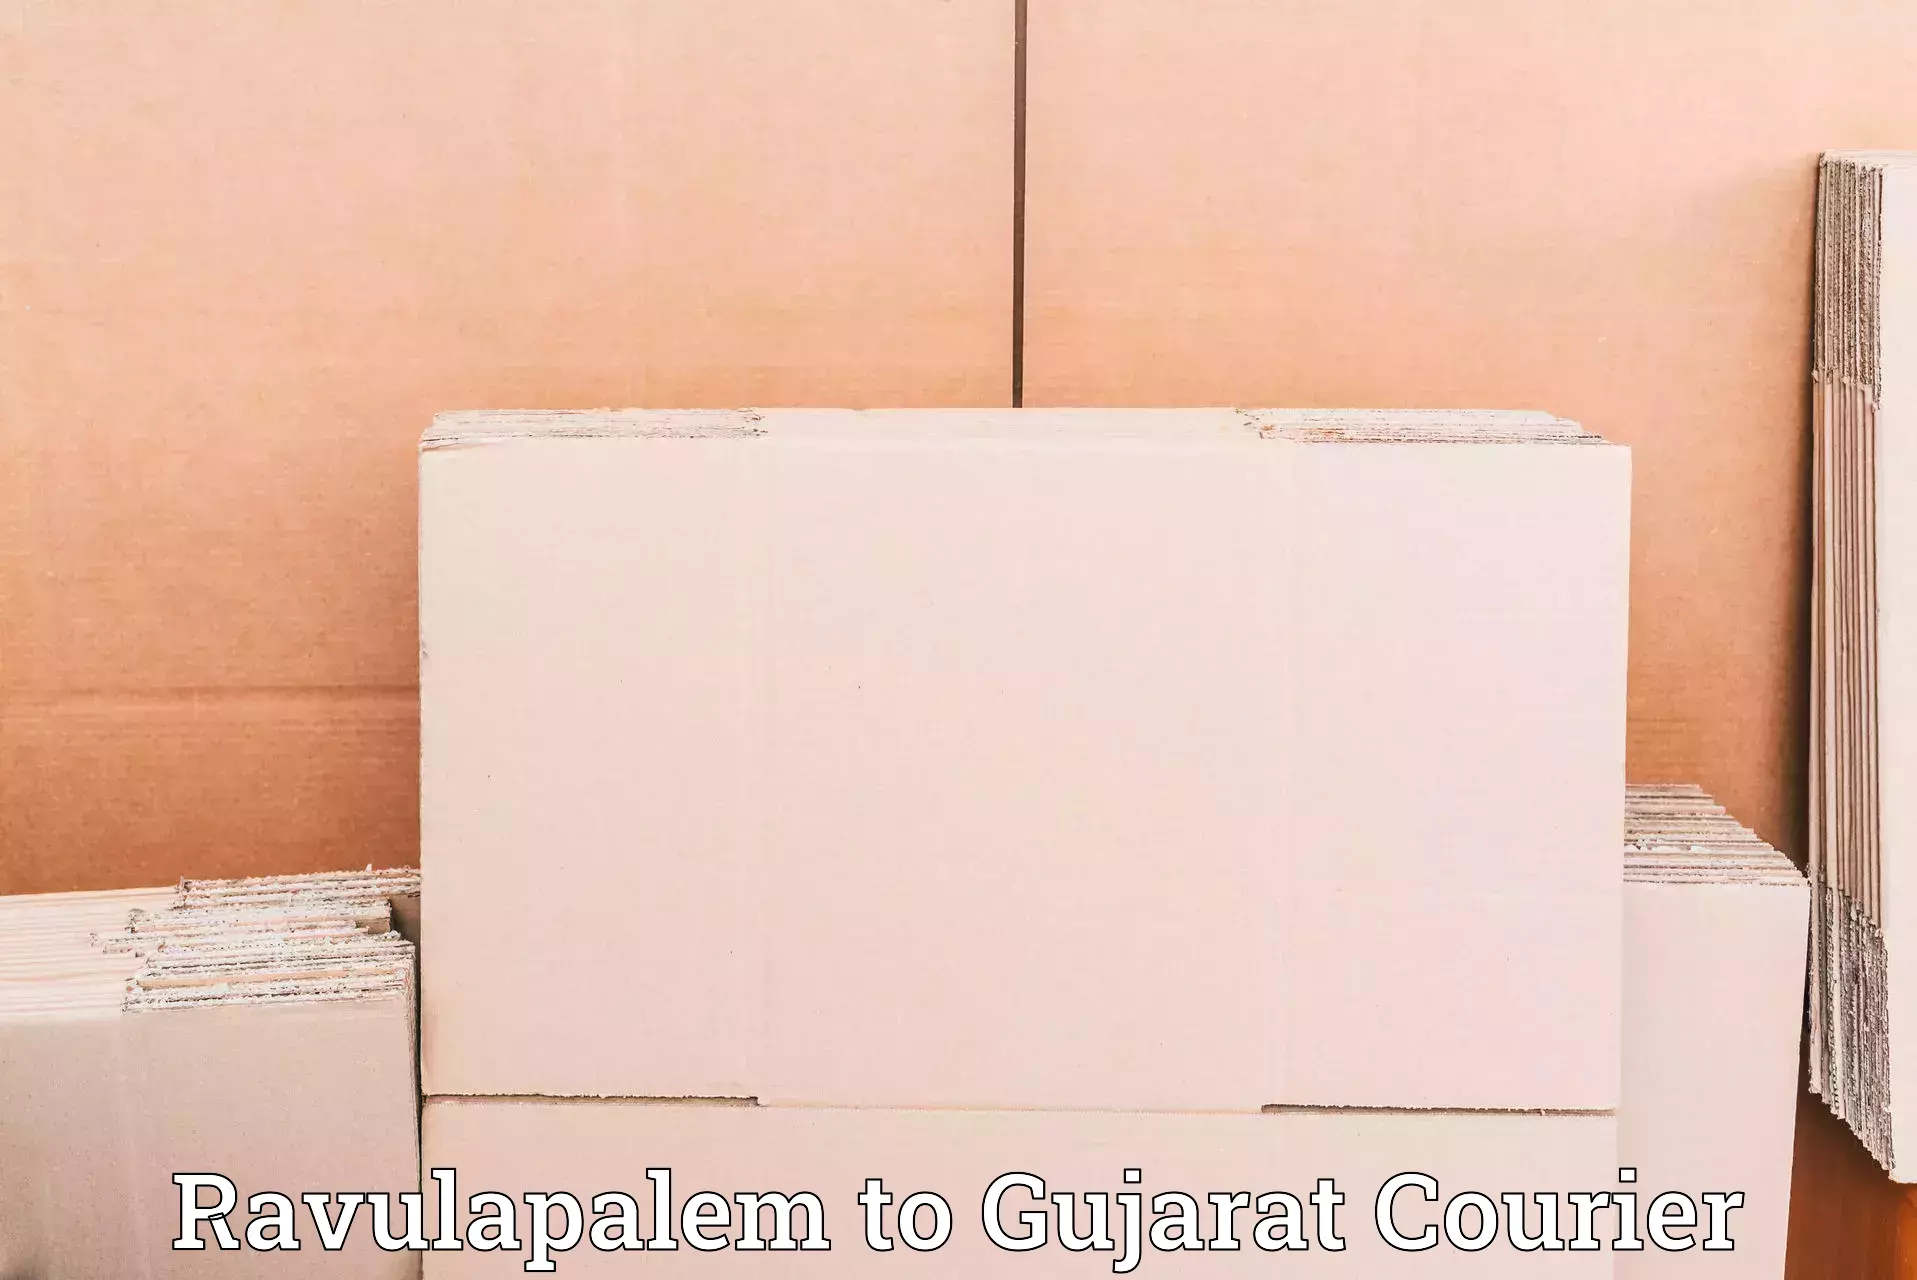 State-of-the-art courier technology in Ravulapalem to Gujarat